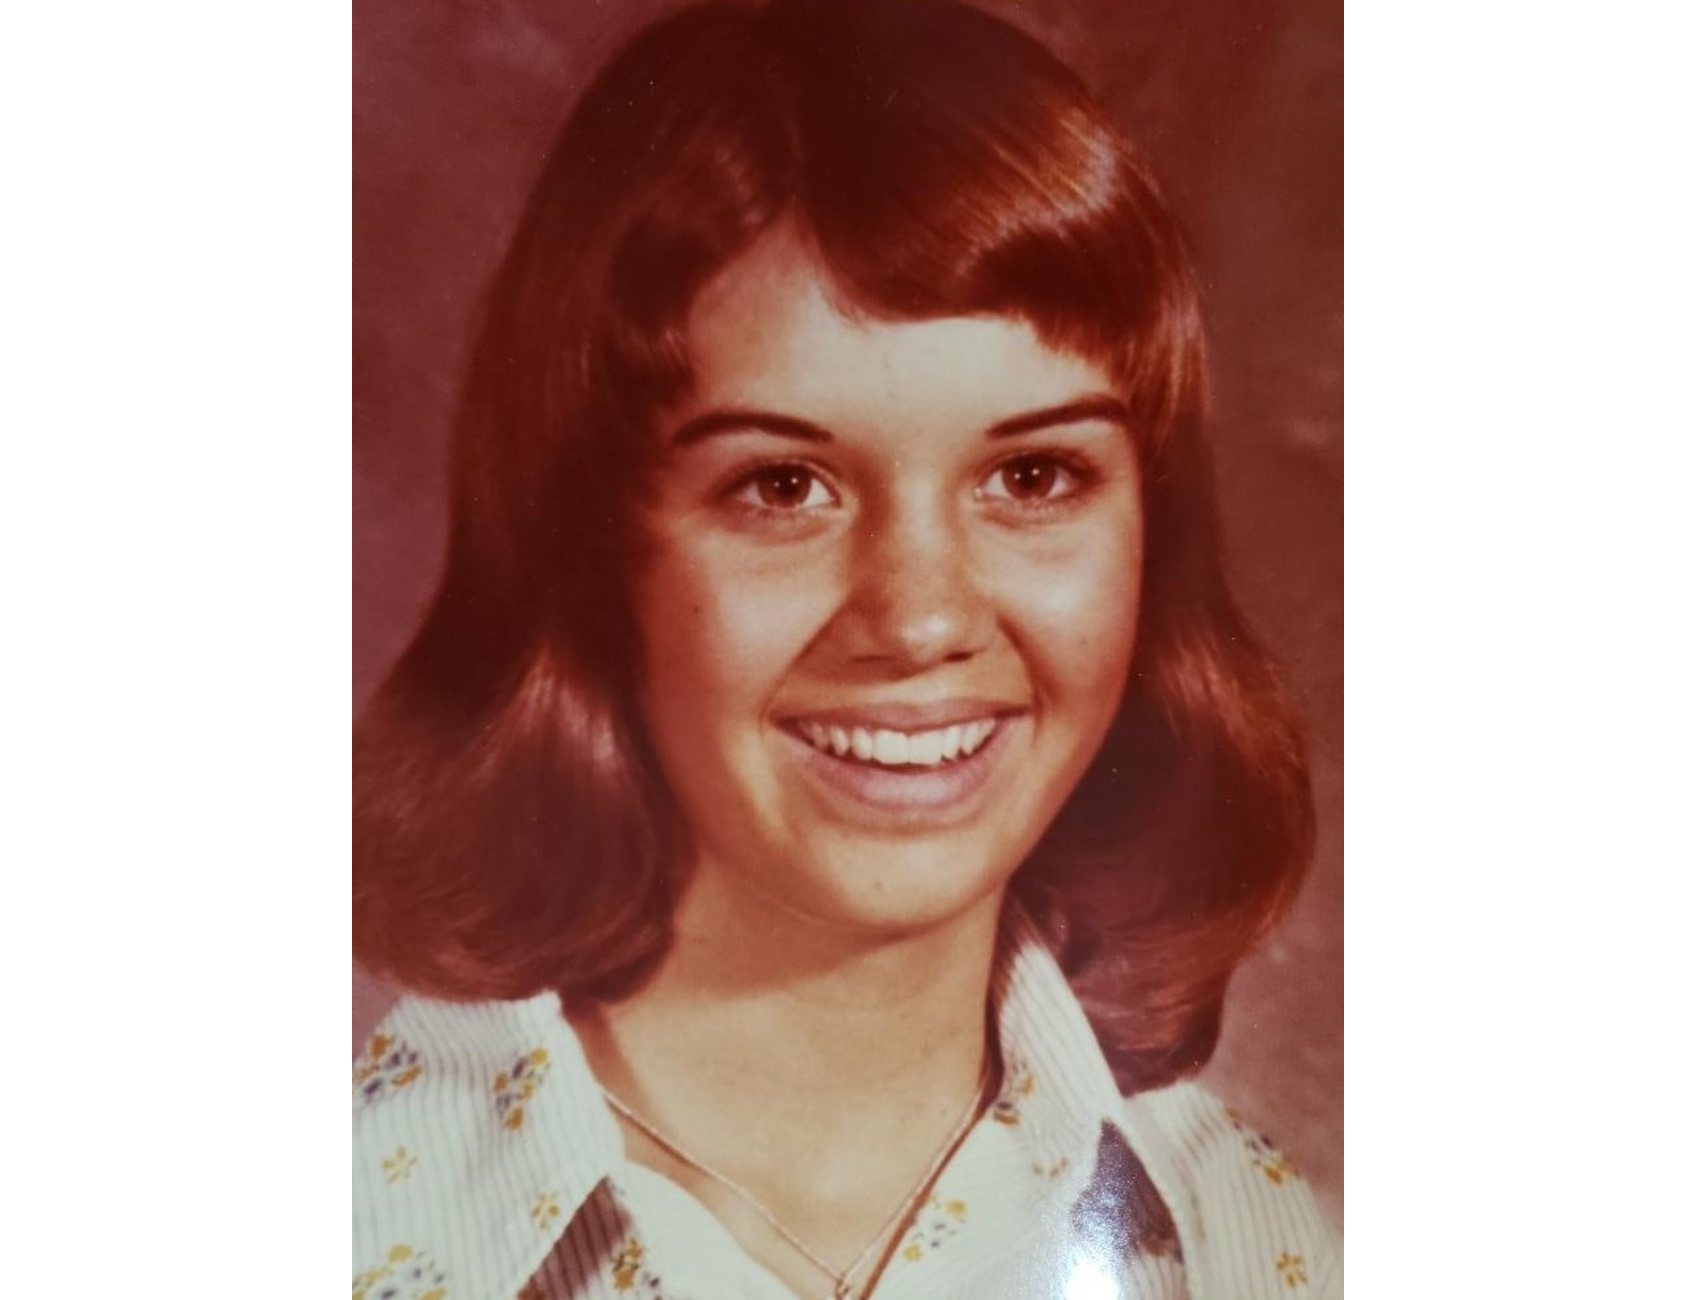 Cynthia Dawn Kinney vanished from a laundromat in Oklahoma in 1976.